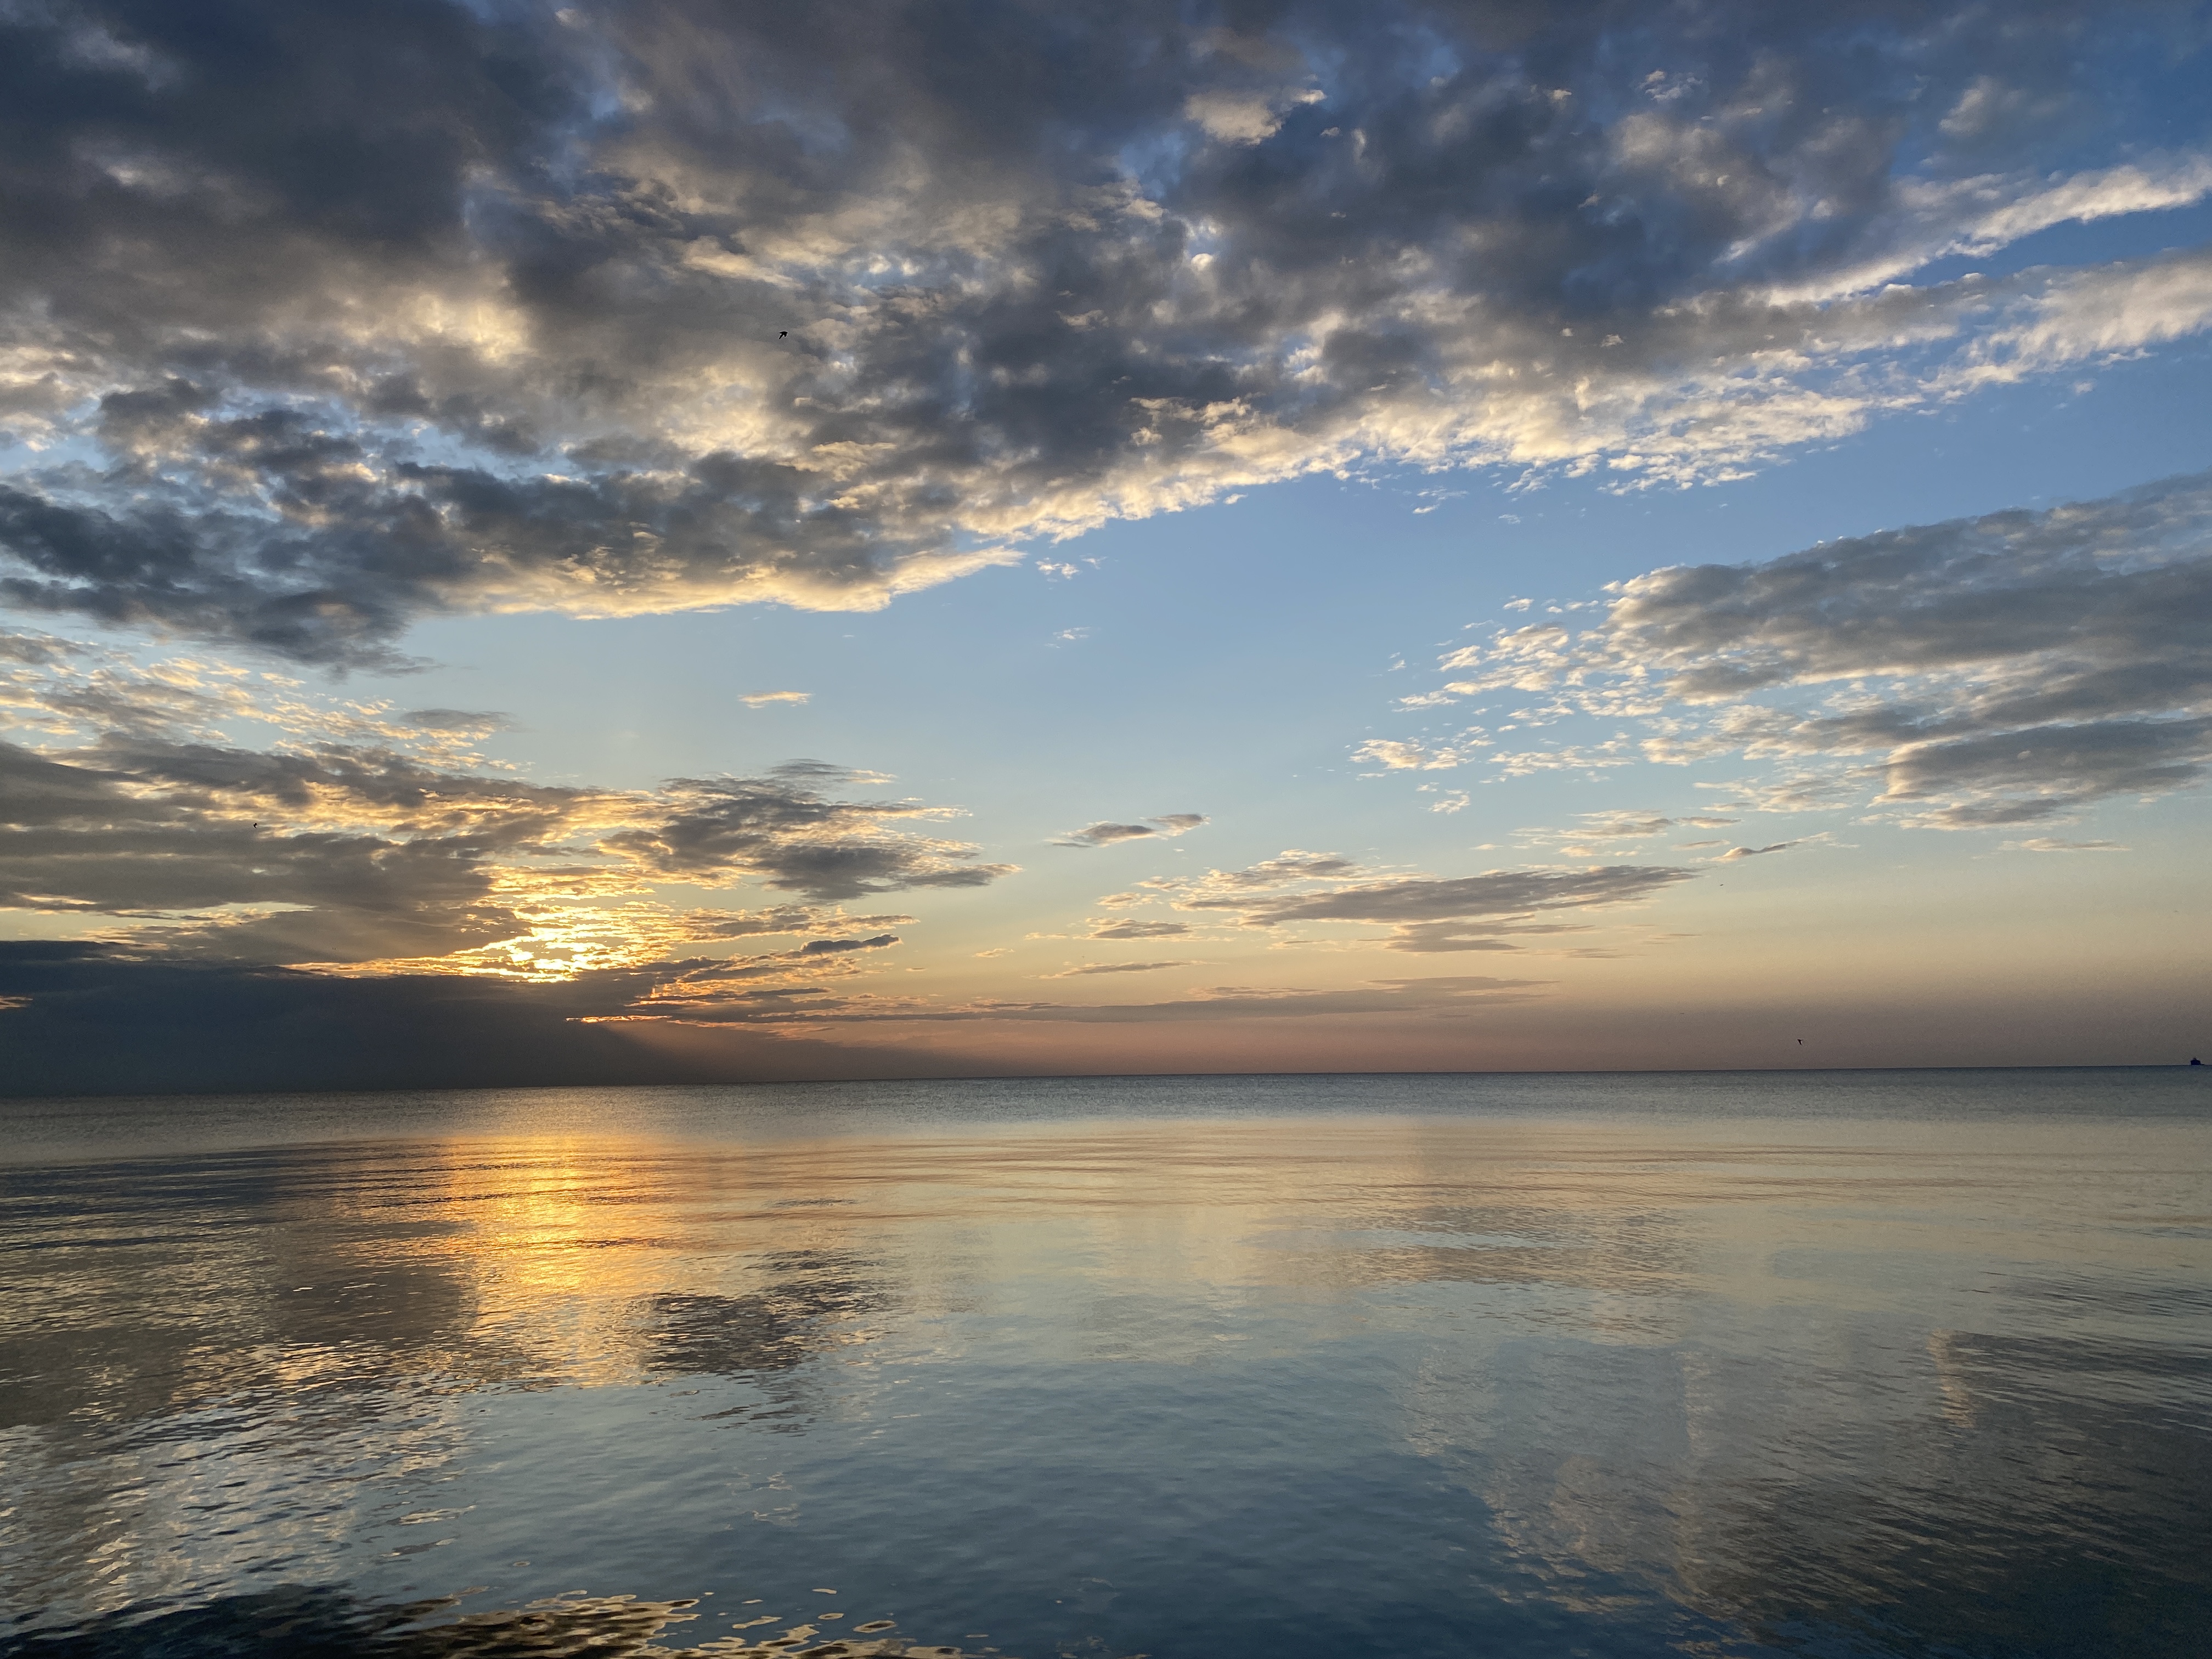 A large lake under a blue sky swept with broken clouds, an orange sunrise just behind, the water surface smooth and glassy, reflecting the colors of the sky